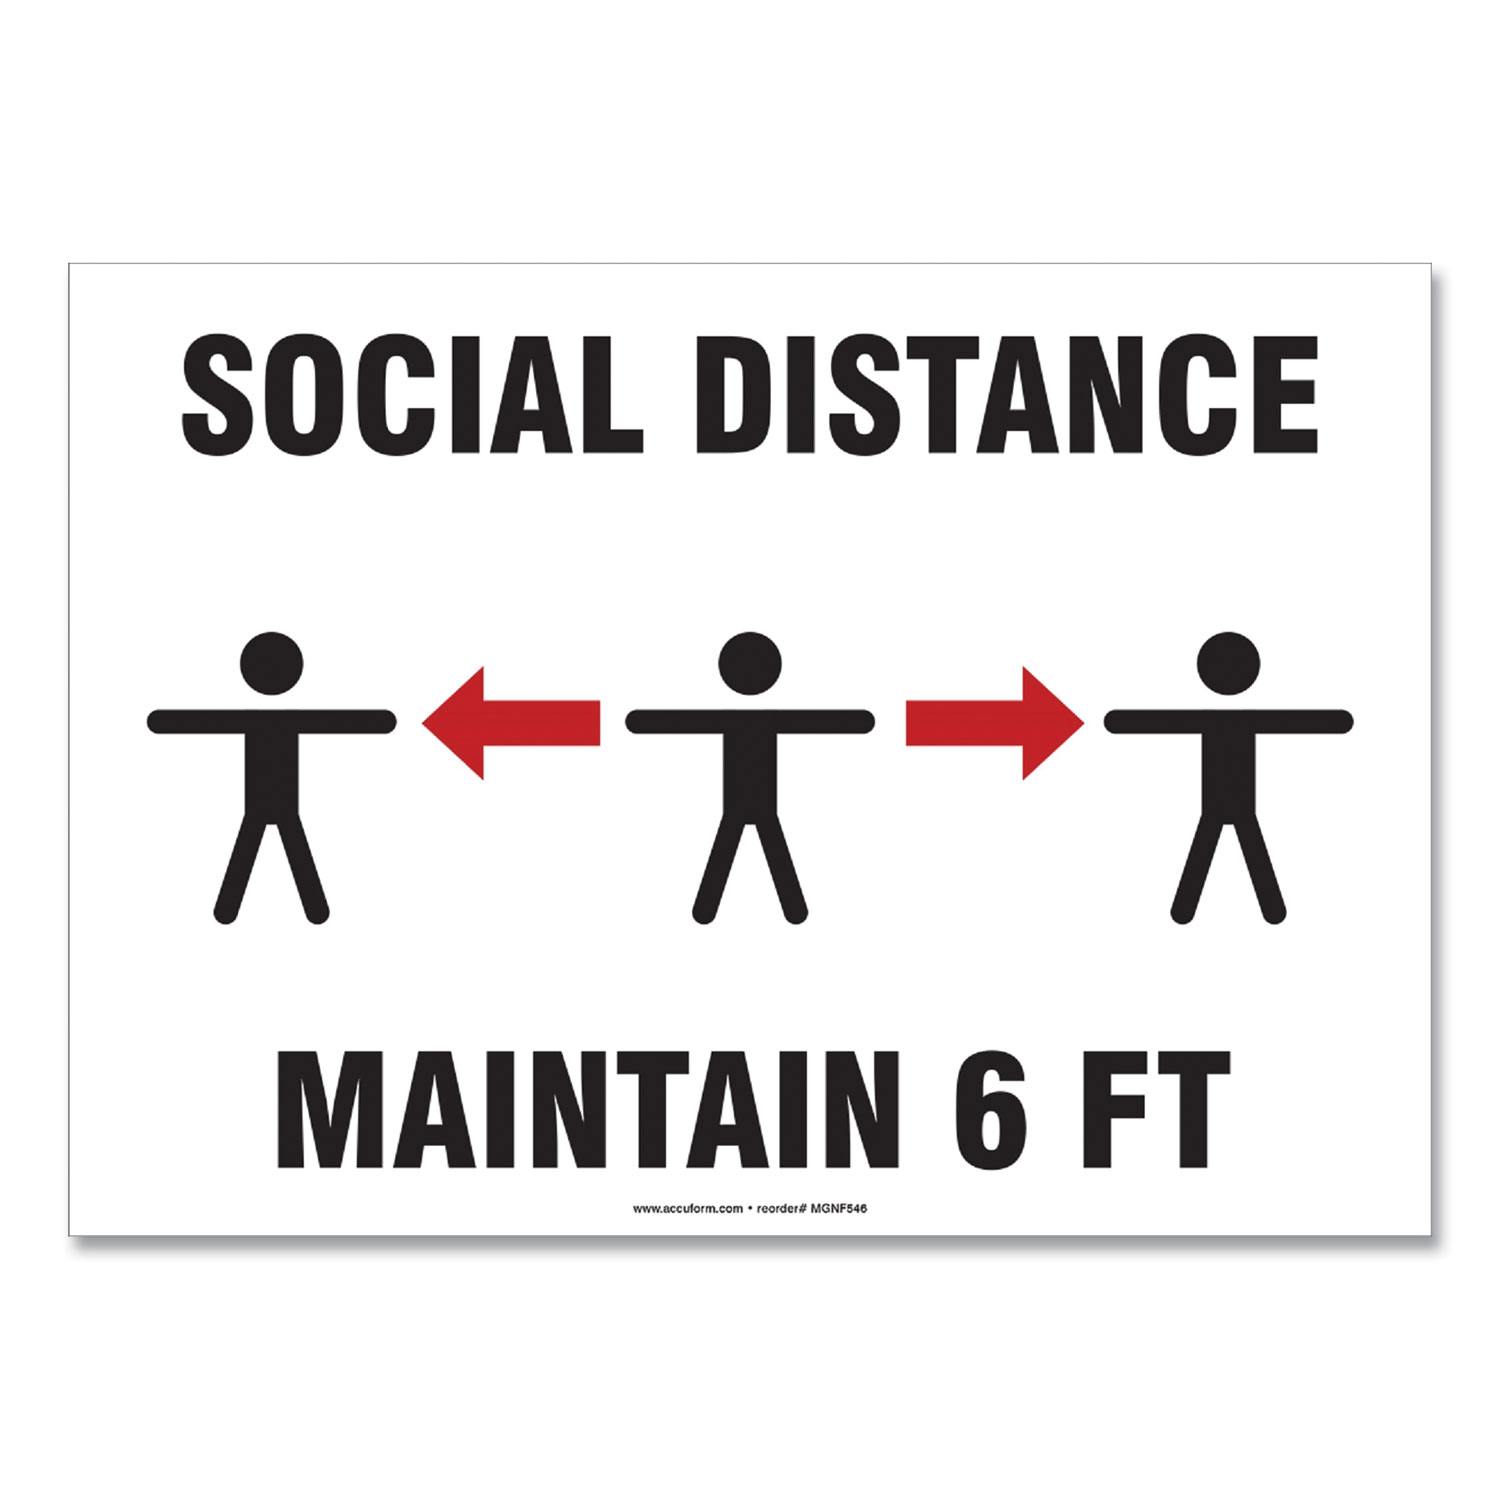 Accuform® Social Distance Signs, Wall, 14 x 10, Social Distance Maintain 6 ft, 3 Humans/Arrows, White, 10/Pack